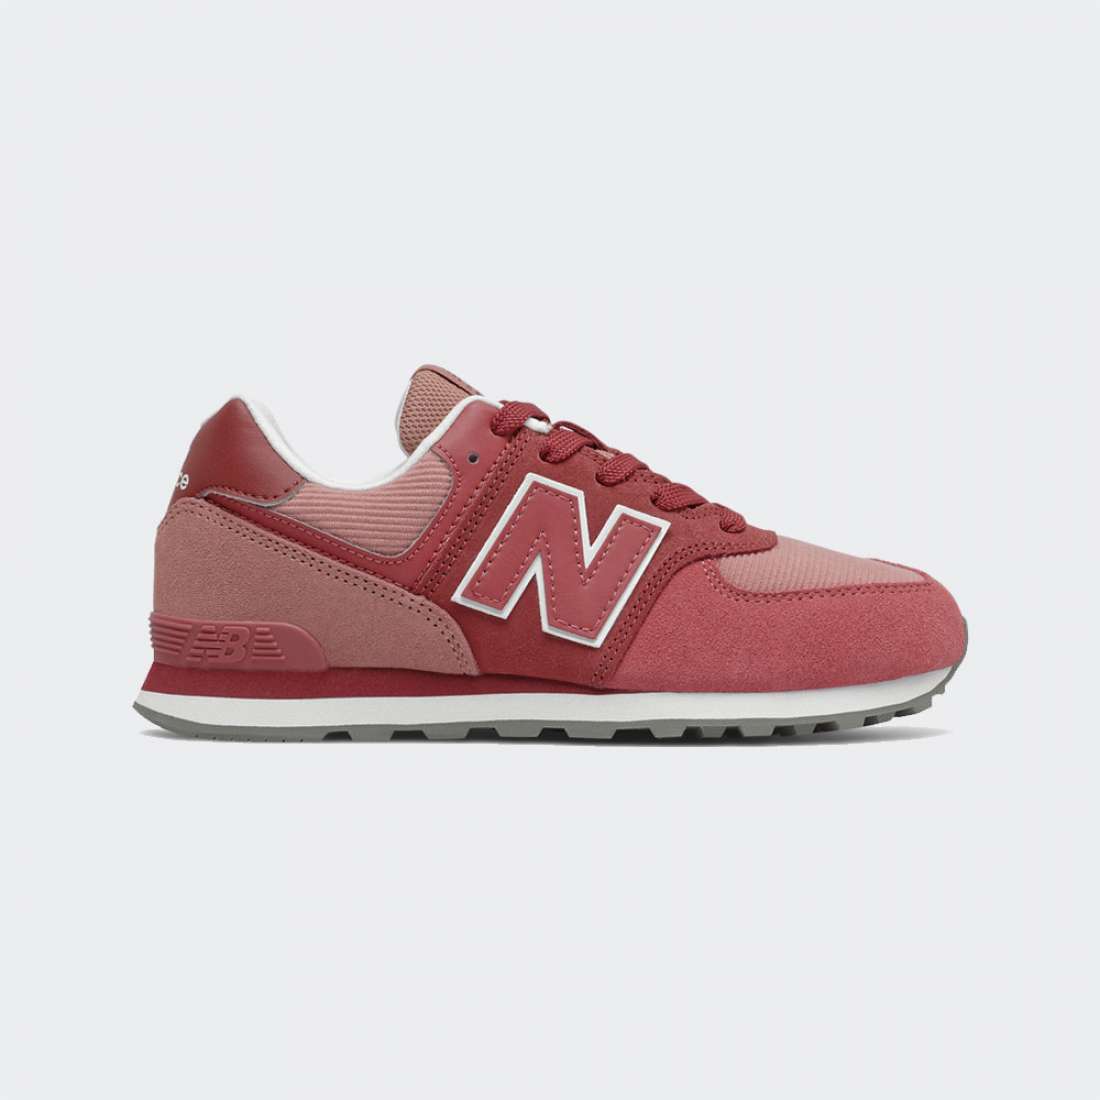 NEW BALANCE 574 DEEP EARTH RED/WASHED HEN